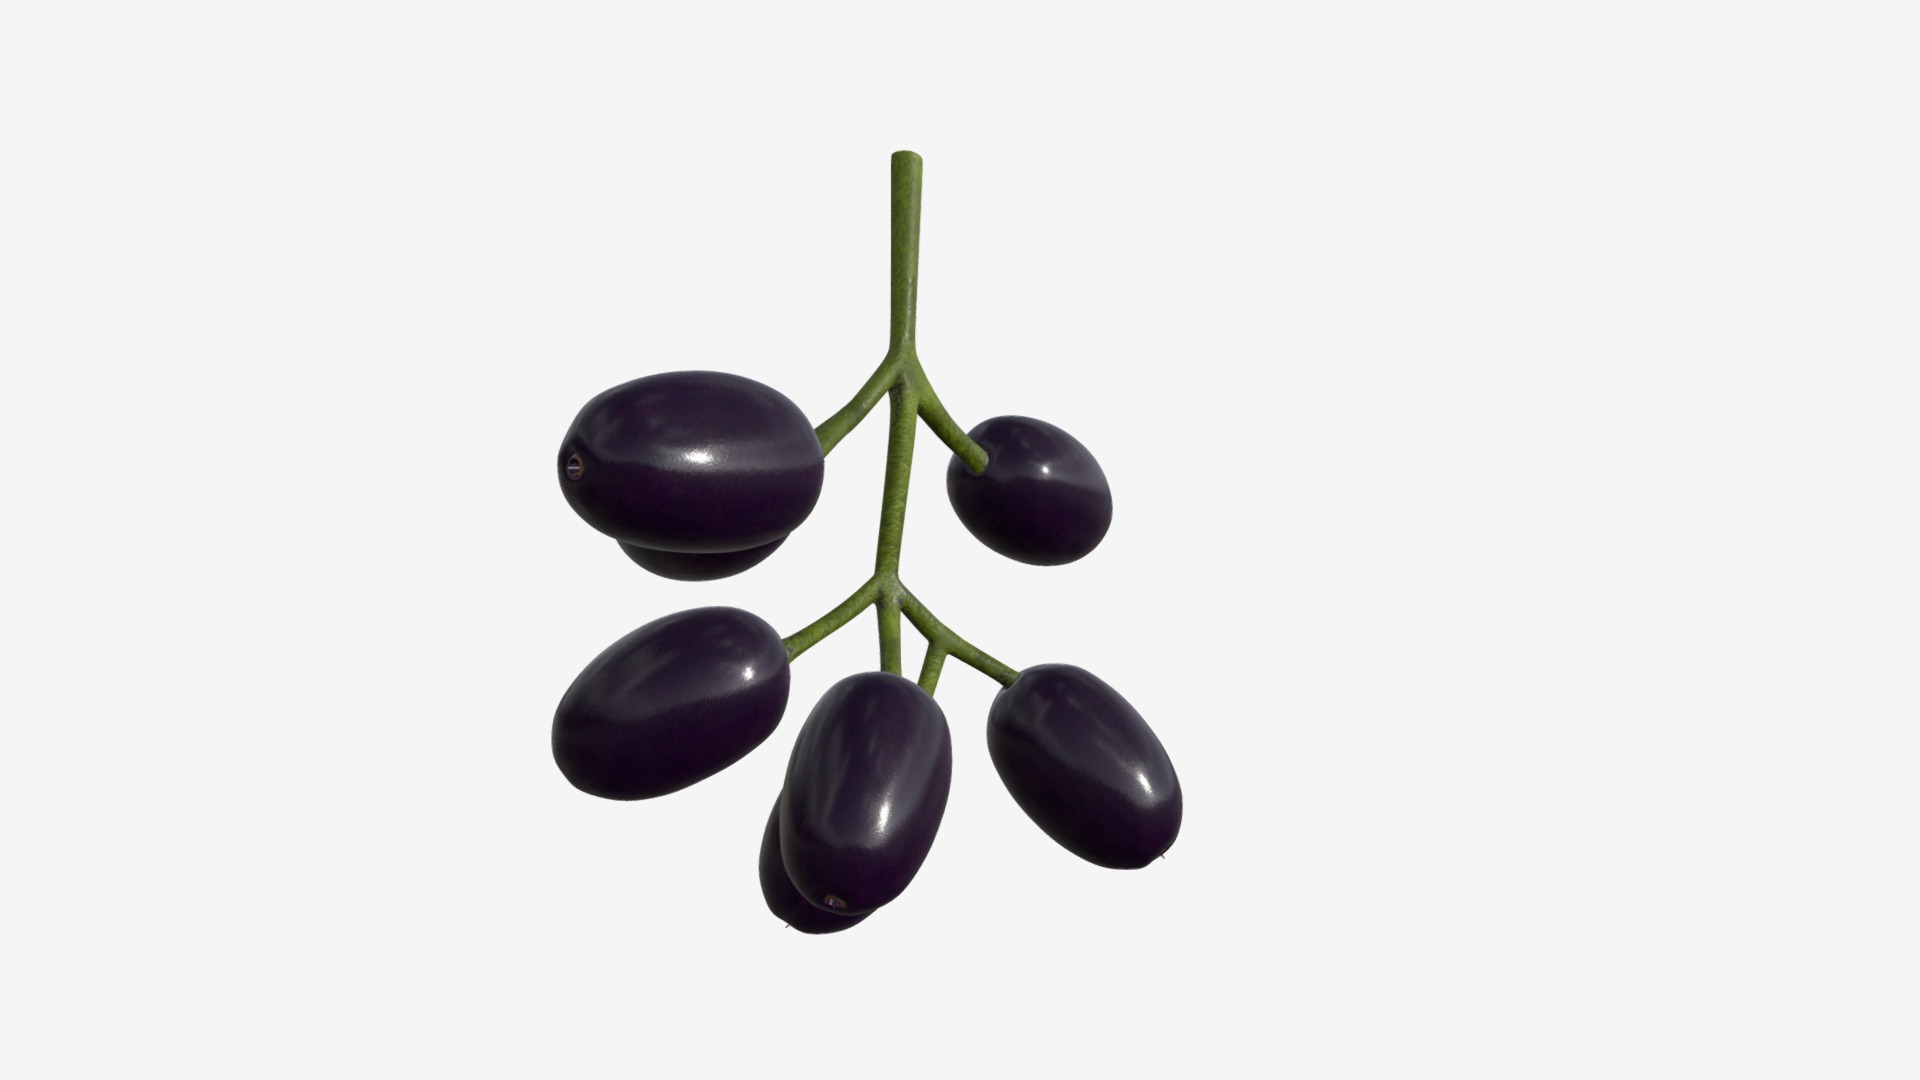 3D model Jambolan plums with stem - This is a 3D model of the Jambolan plums with stem. The 3D model is about a group of black grapes.